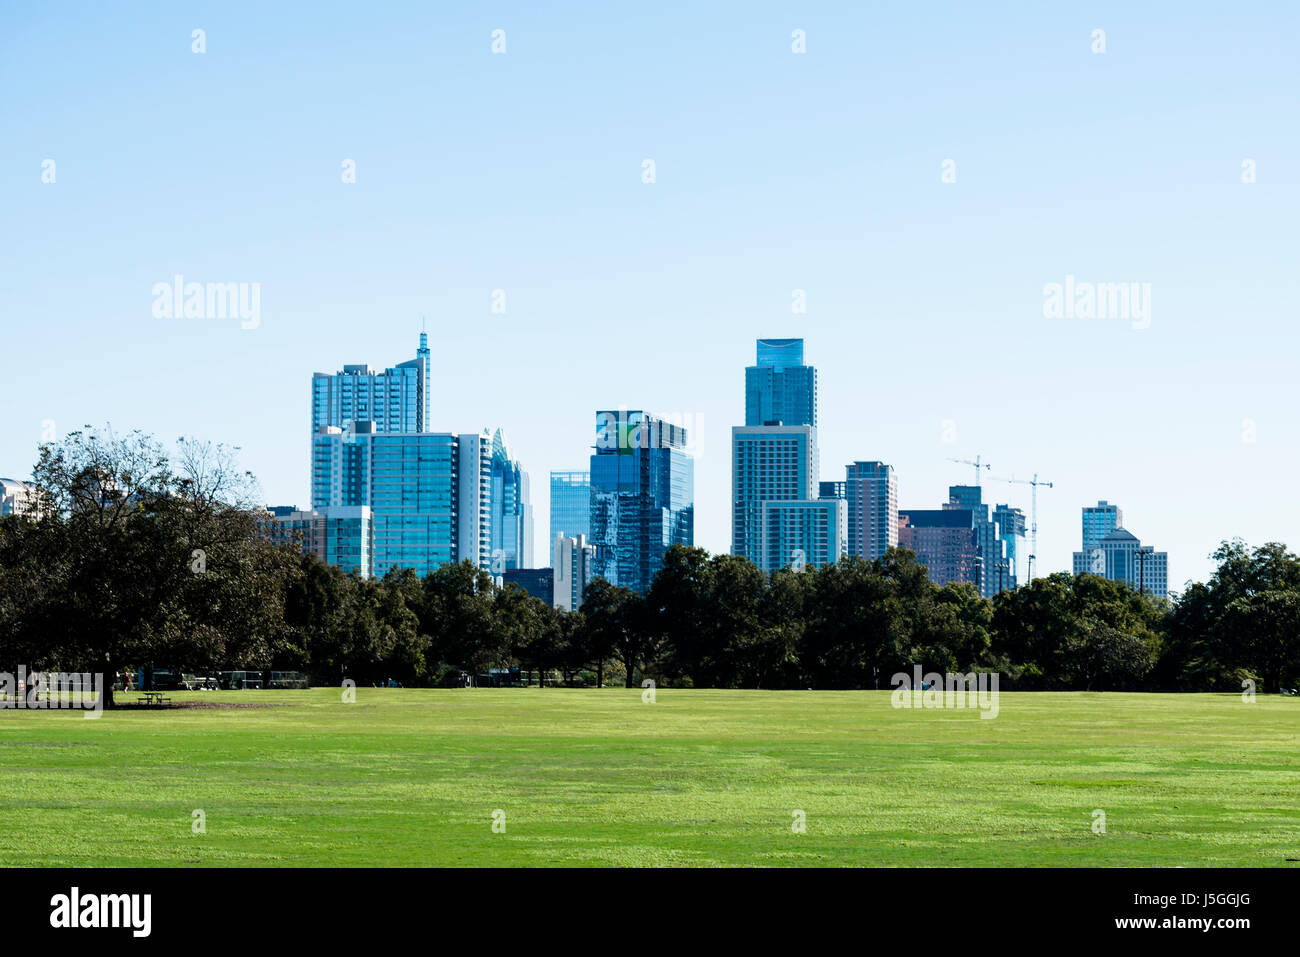 Skyline of Austin Texas USA from the Great Lawn of Zilker Park Stock Photo  - Alamy